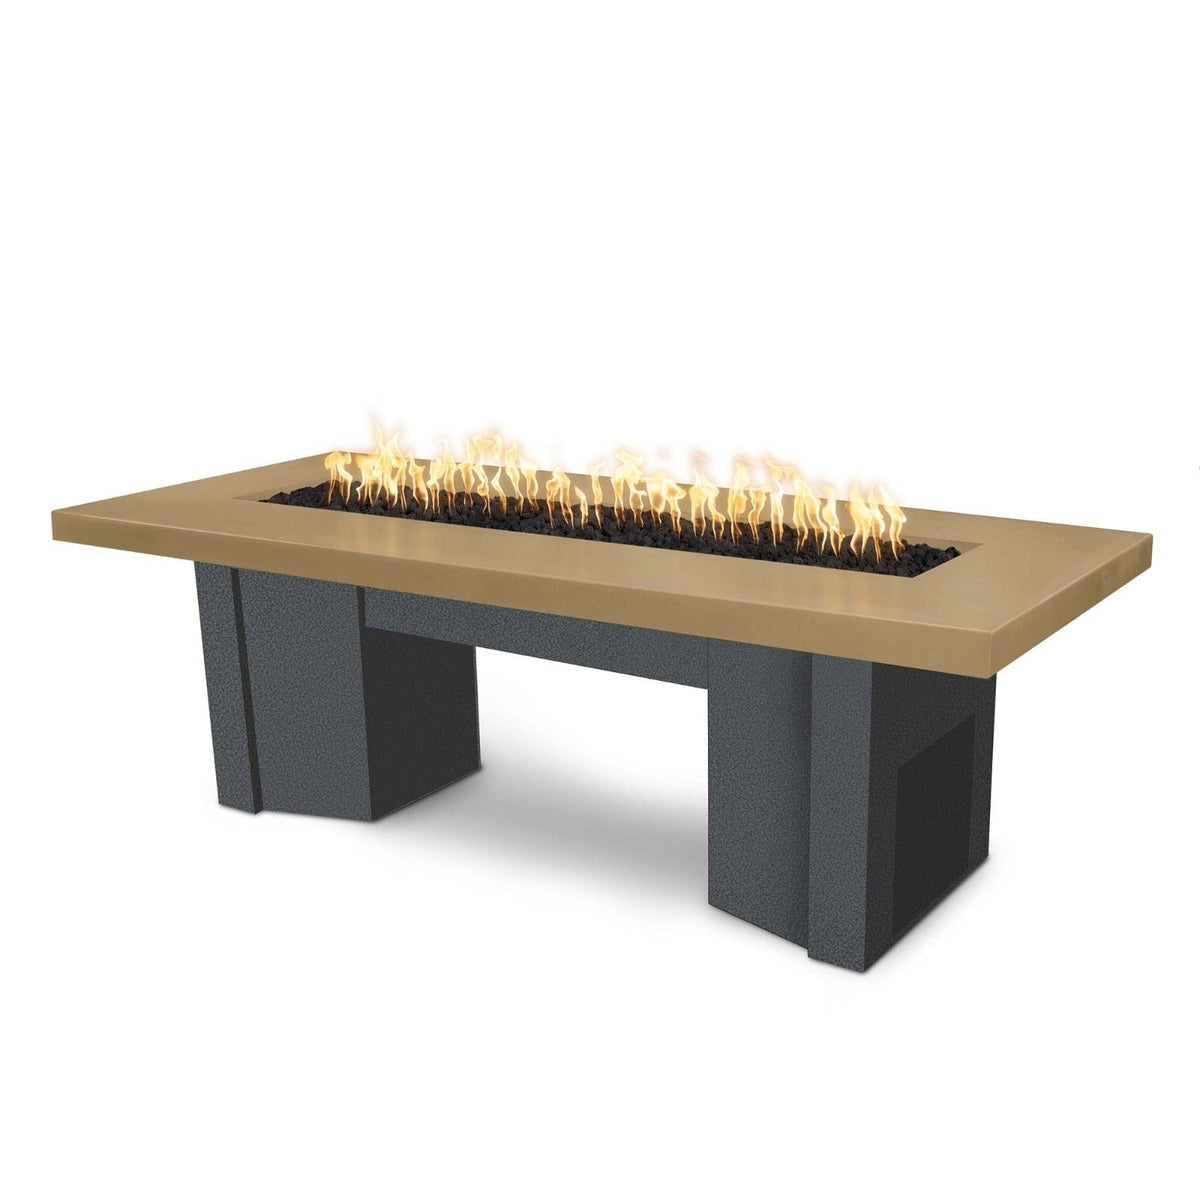 The Outdoor Plus Fire Features Brown (-BRN) / Silver Vein Powder Coated Steel (-SLV) The Outdoor Plus 60&quot; Alameda Fire Table Smooth Concrete in Liquid Propane - Match Lit / OPT-ALMGFRC60-LP